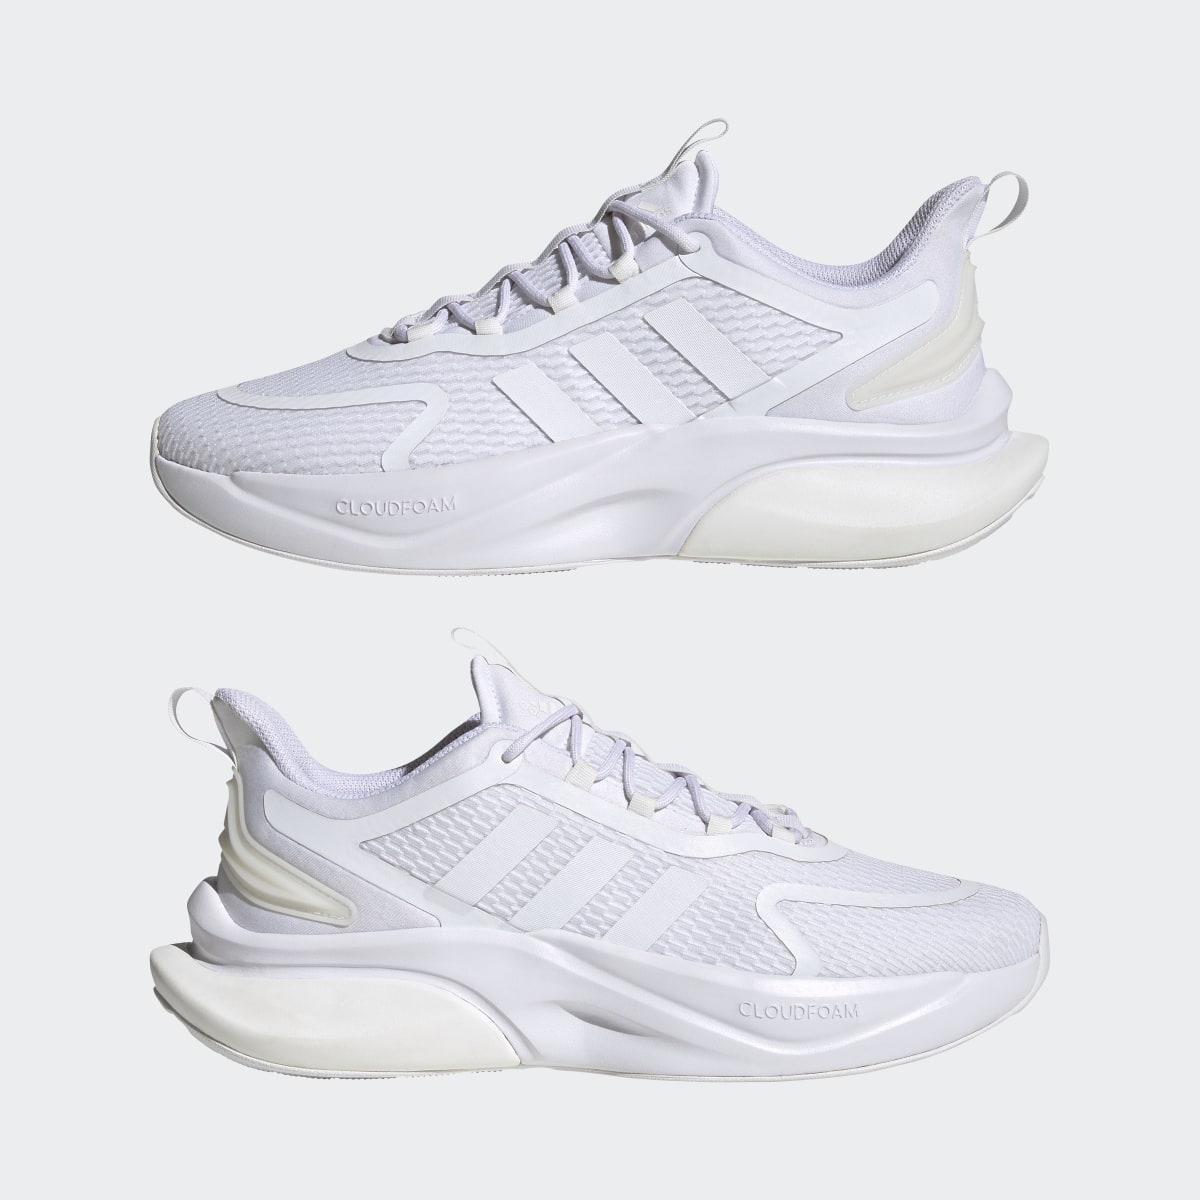 Adidas Alphabounce+ Shoes. 8